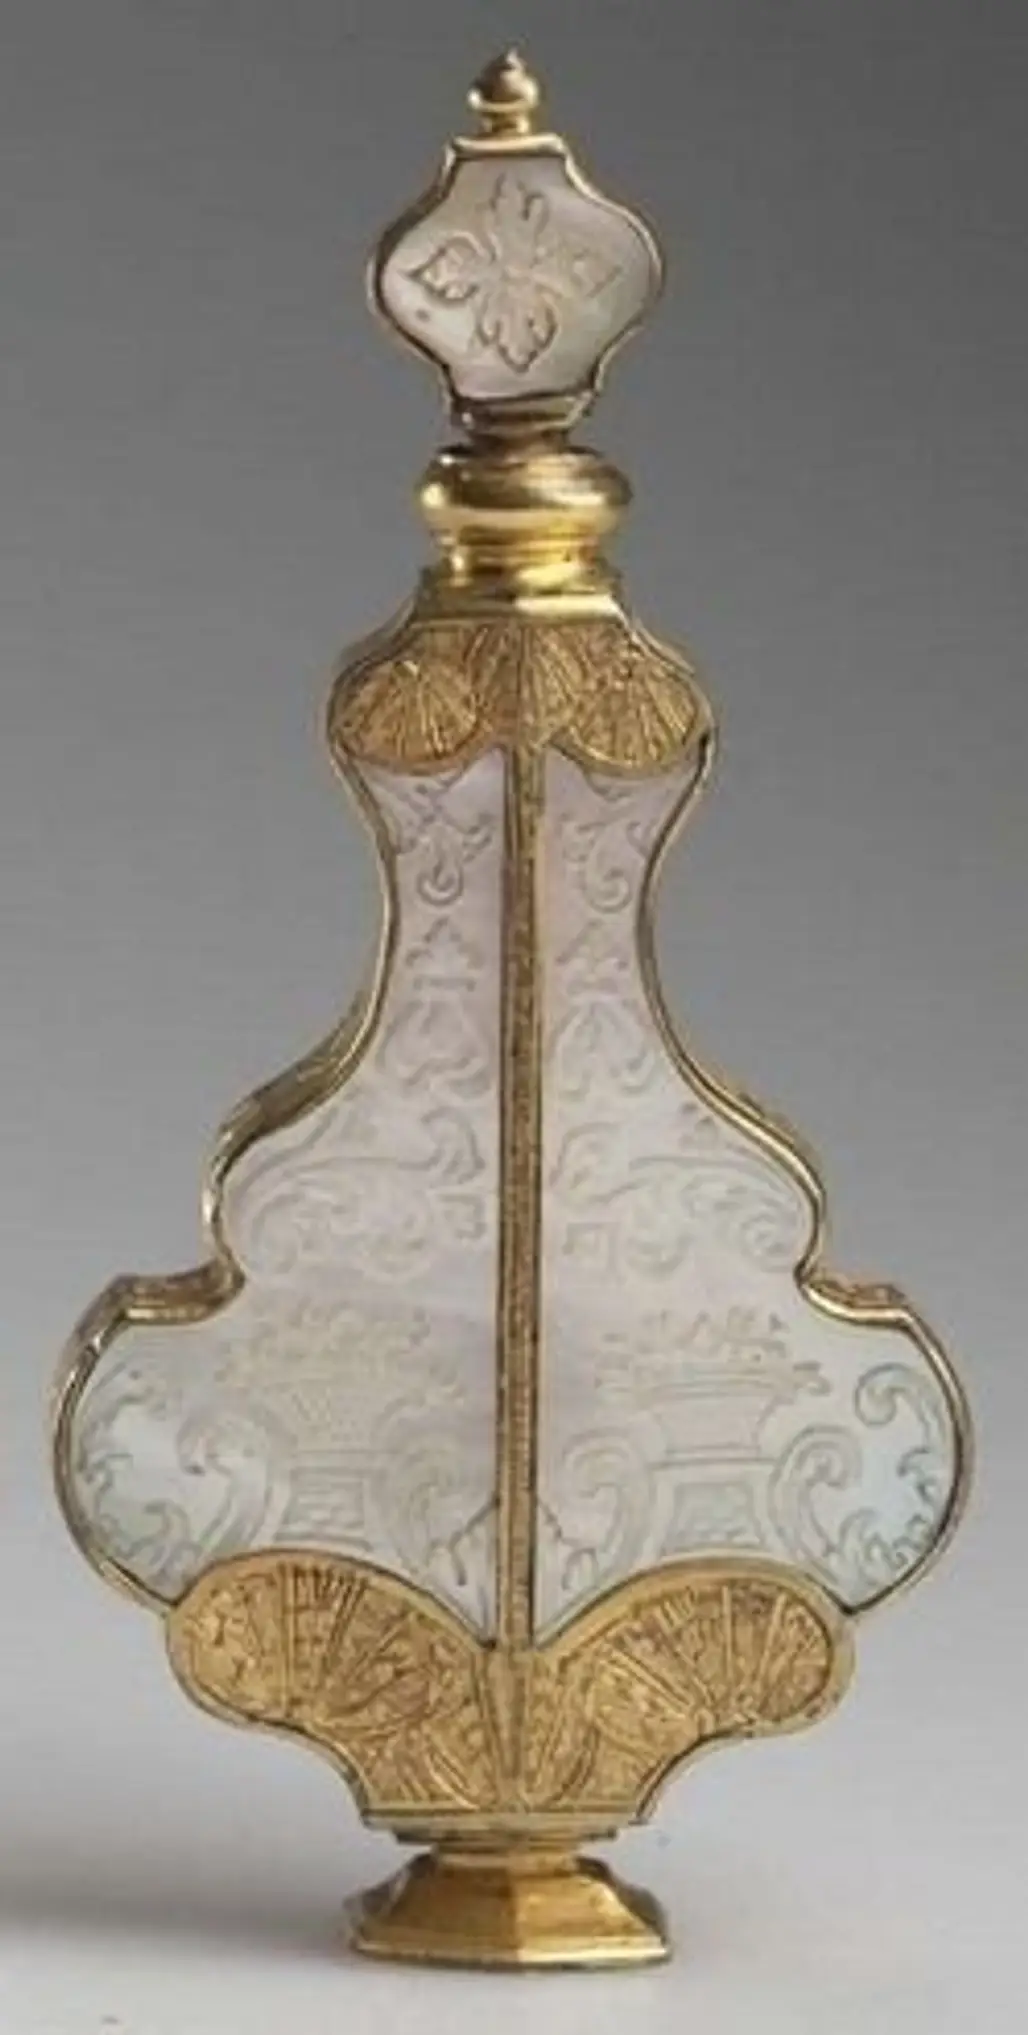 Gilt-metal-mounted Mother-of-pearl